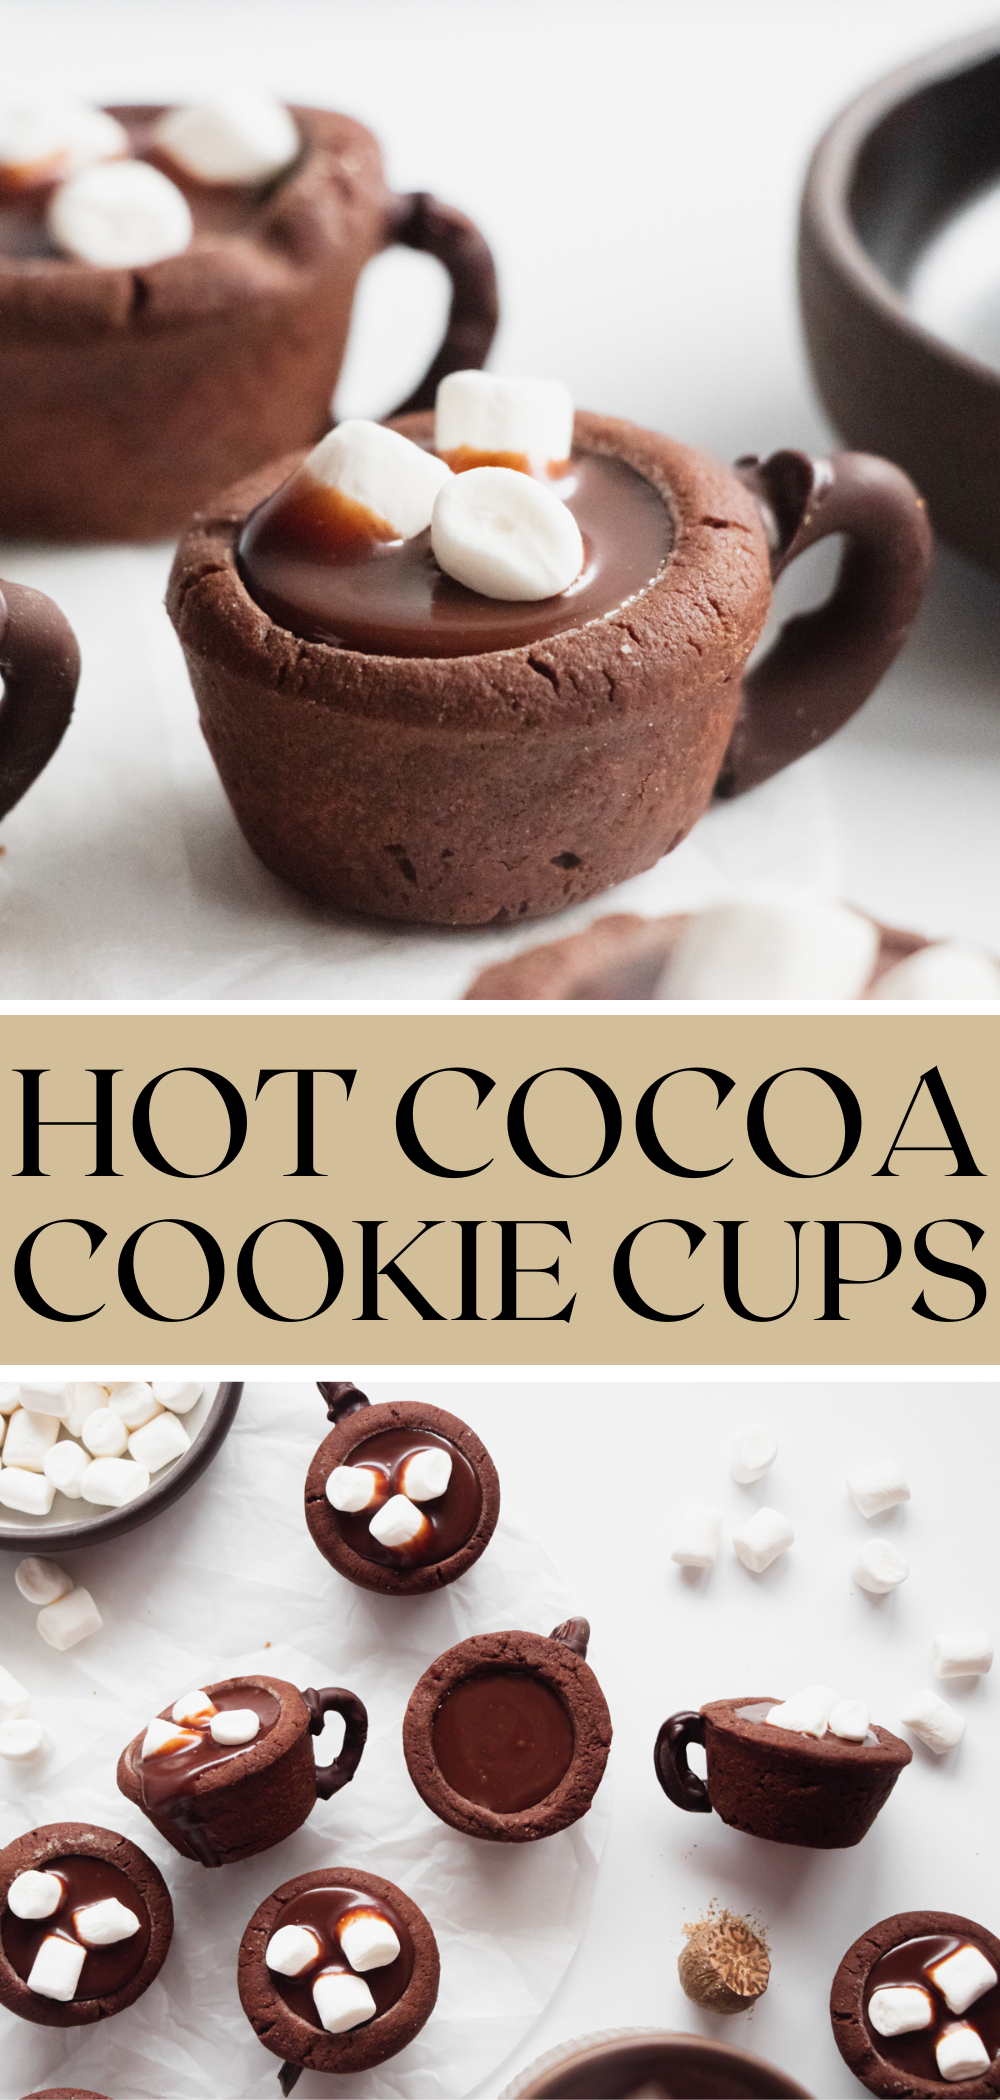 hot cocoa cookie cups pinterest pin